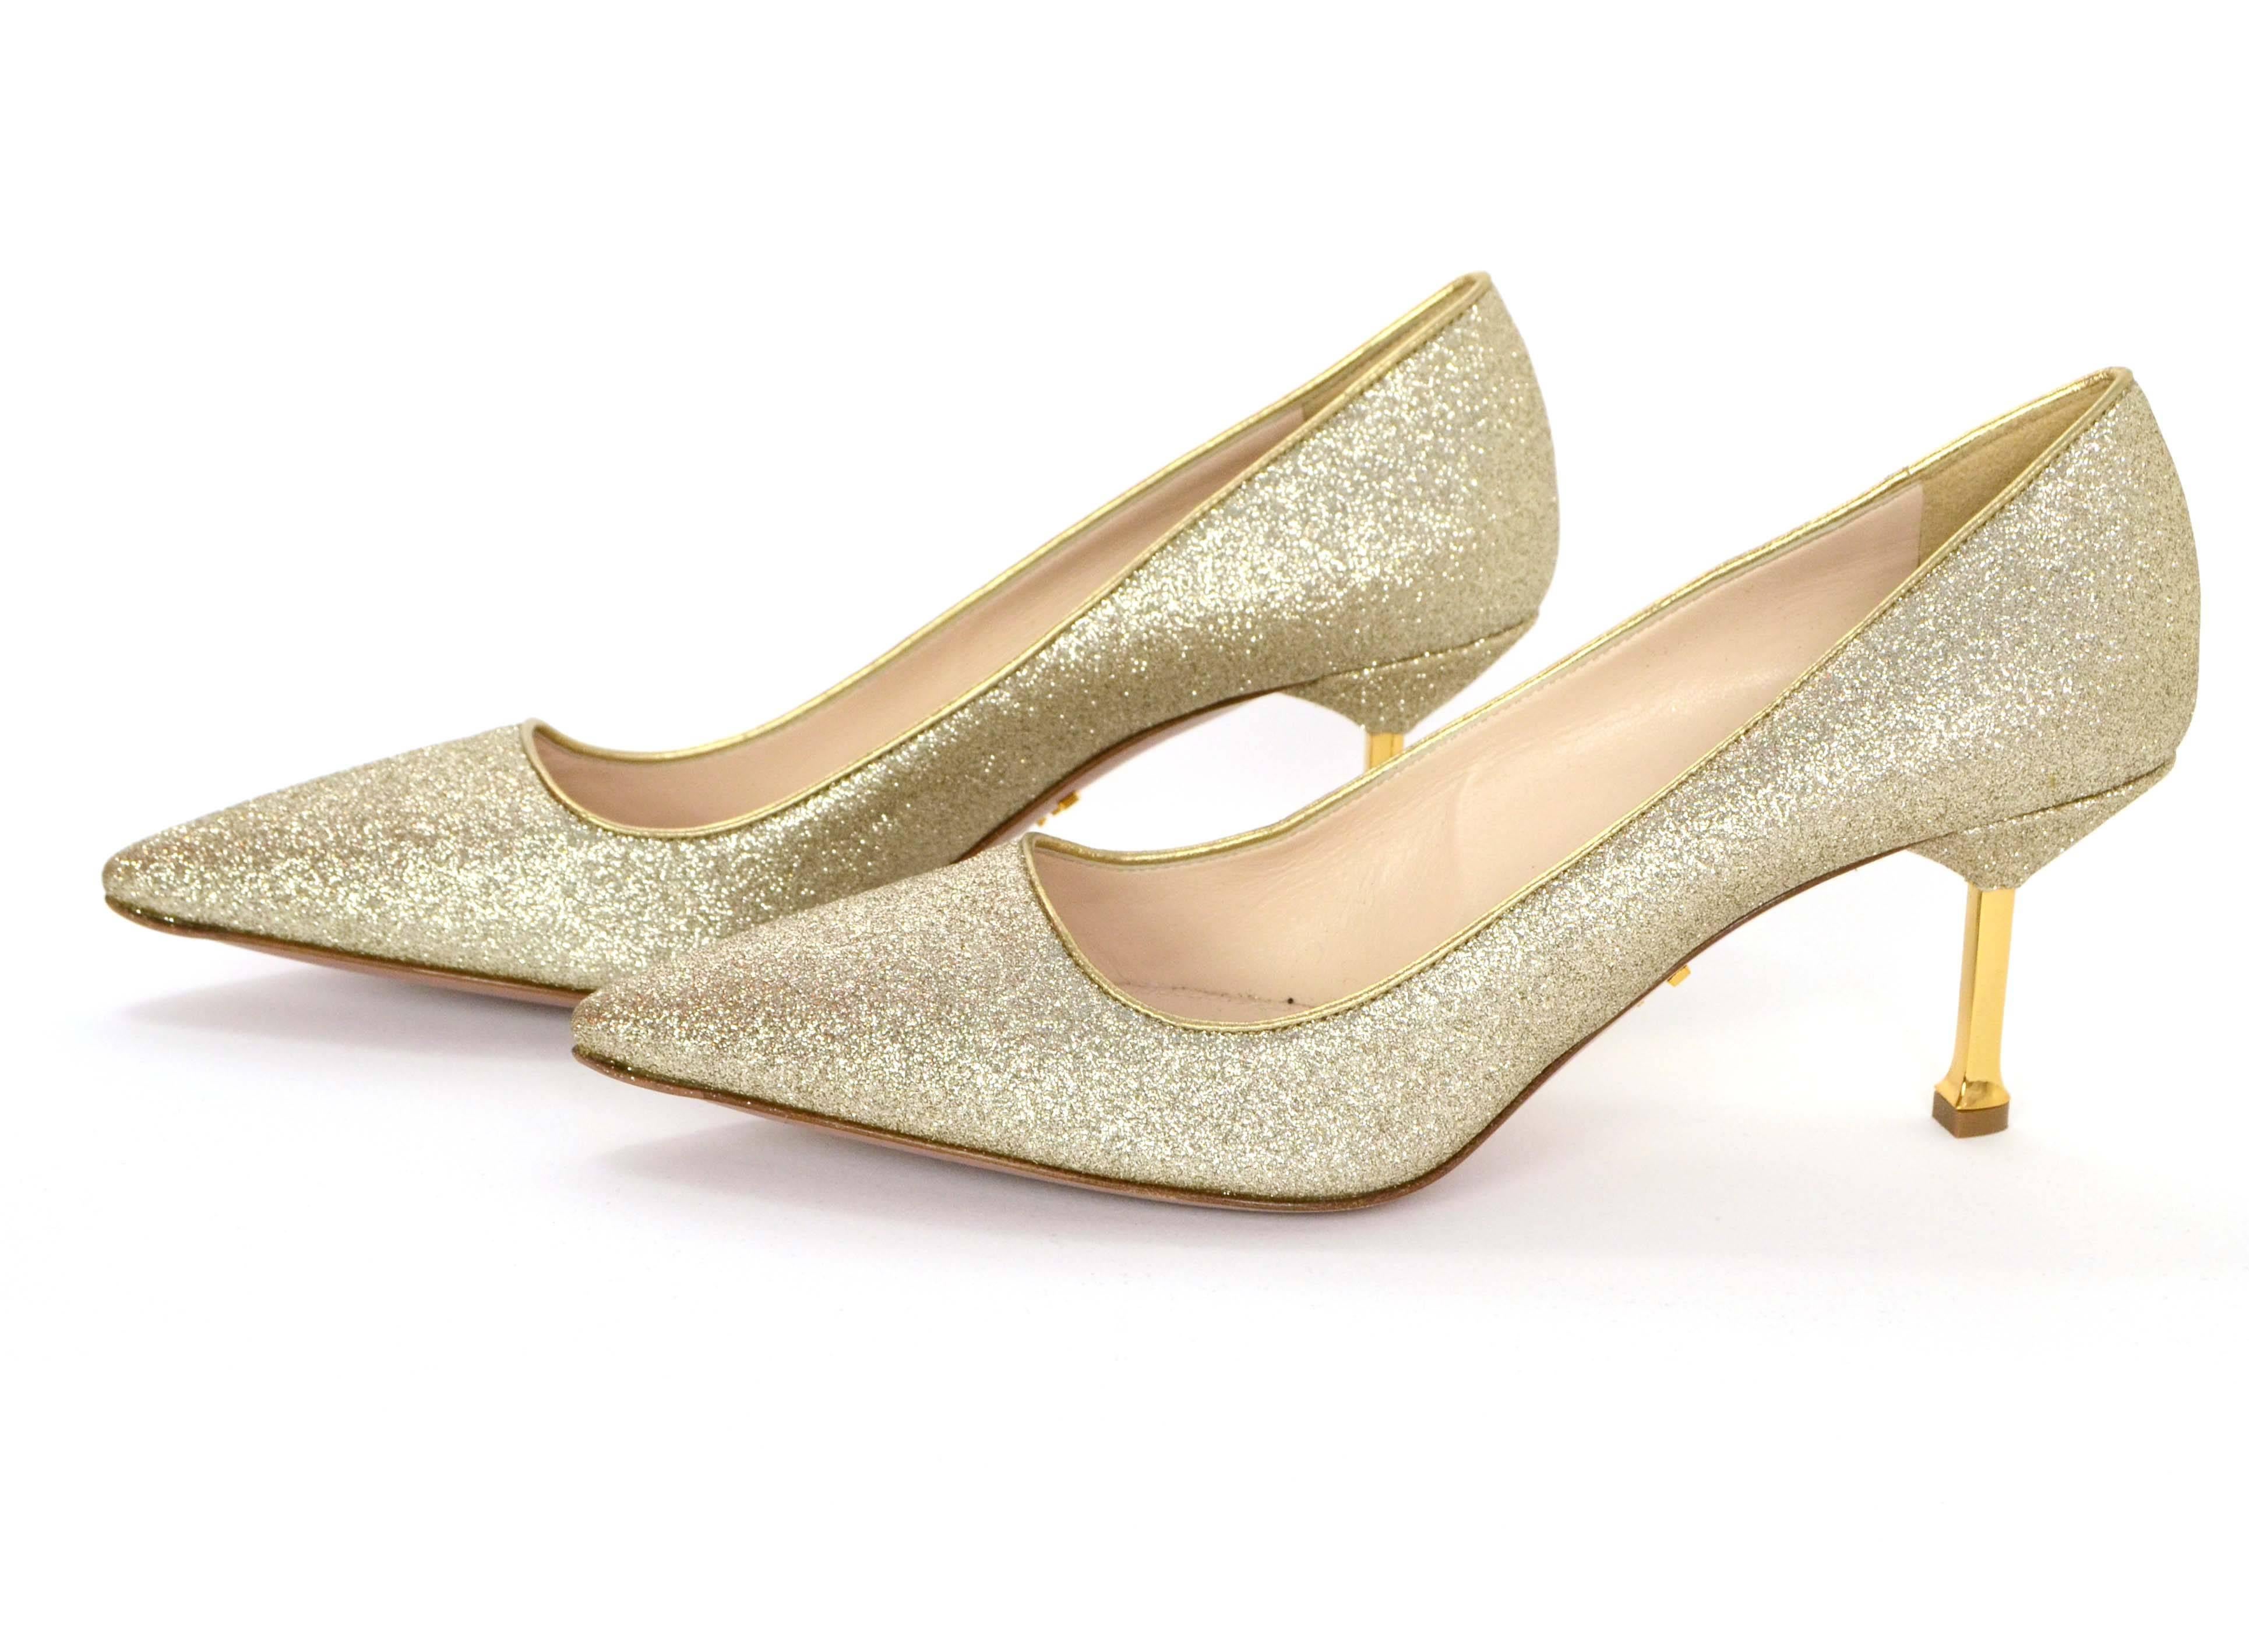 Prada Gold Glitter Kitten Heel Pumps 
Features gold metal covered heels
Made In: Italy
Color: Gold
Materials: Metal, leather and glitter
Closure: Slide on
Sole Stamp: Made in Italy 38 1/2 Prada Milano Dal 1913
Overall Condition: Excellent